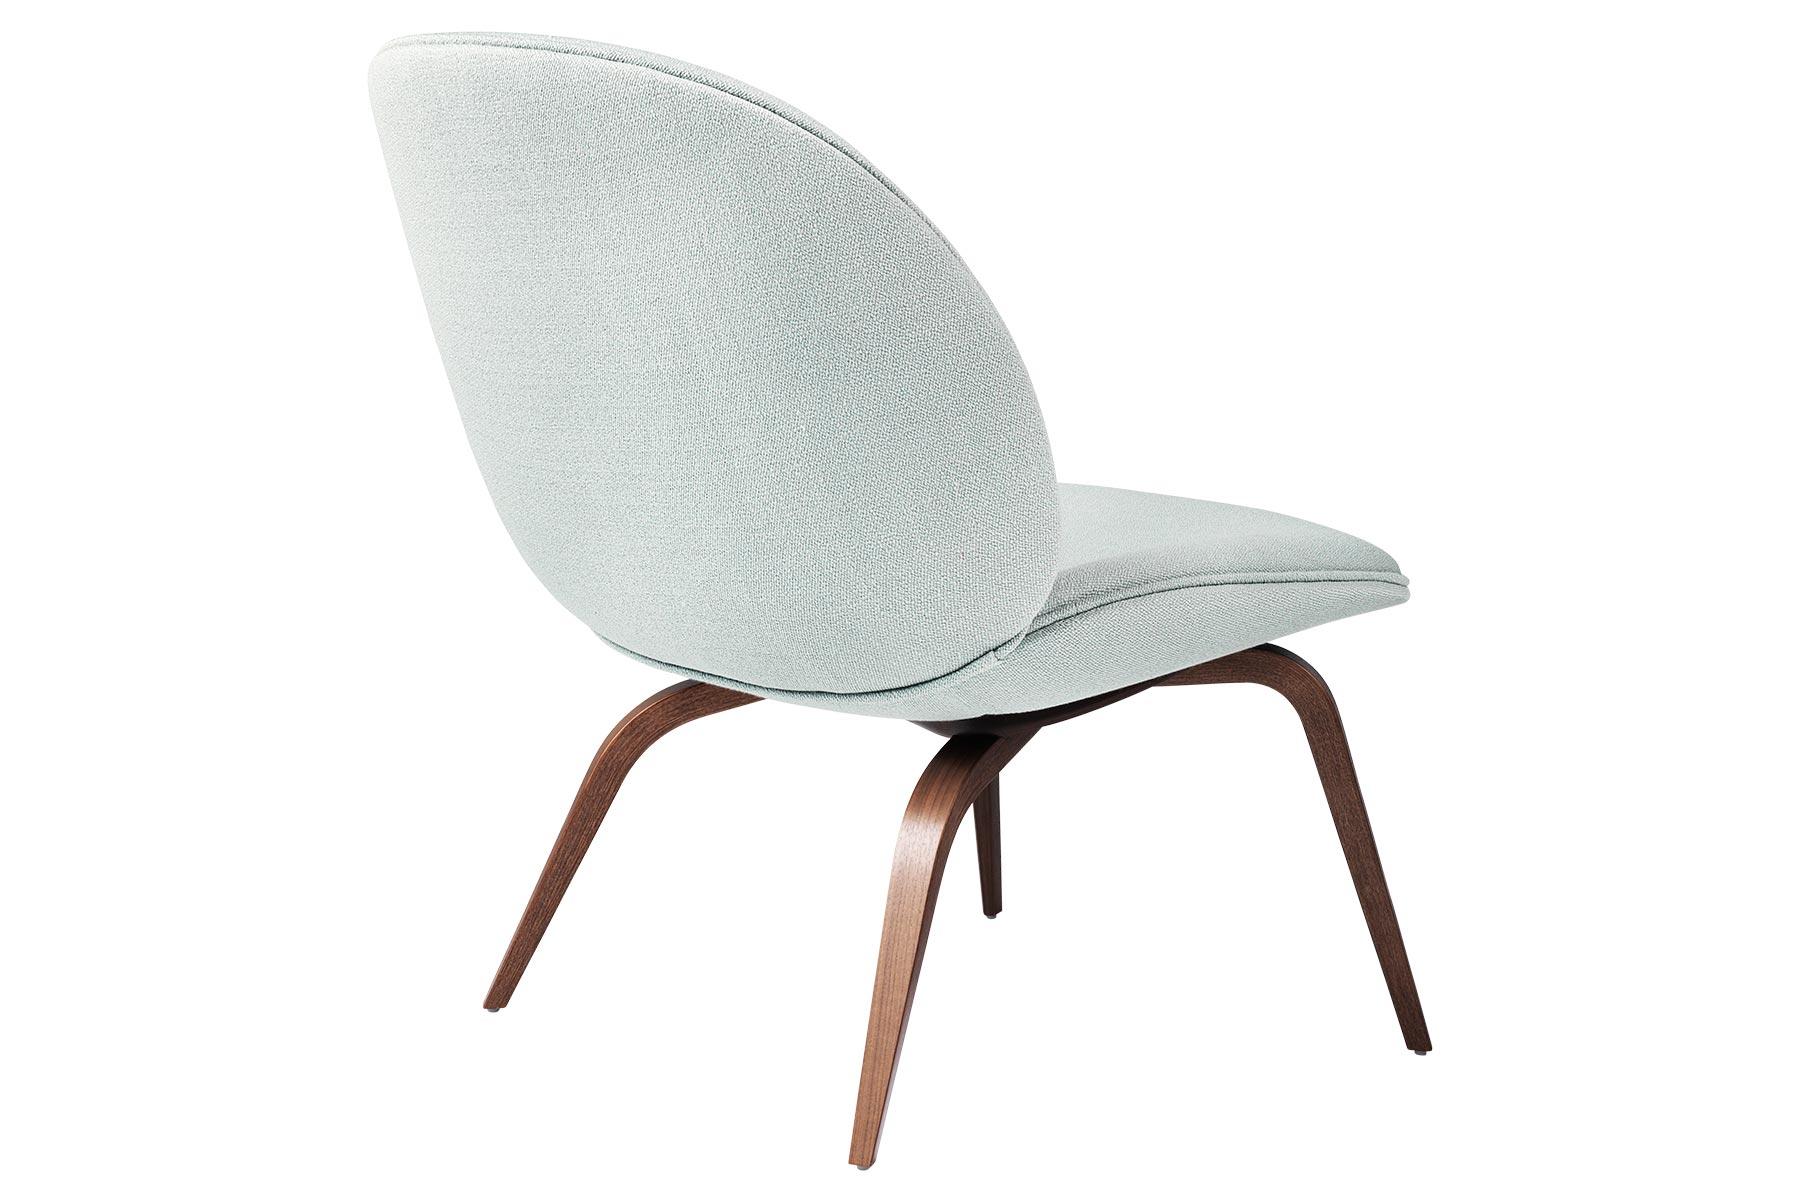 Continuing the success of the Beetle collection, GUBI is adding a wood base to the Beetle lounge chair in oak, smoked oak finish and black stained beech. The Beetle lounge chair carries strong references to GamFratesi’s inspirational source; the